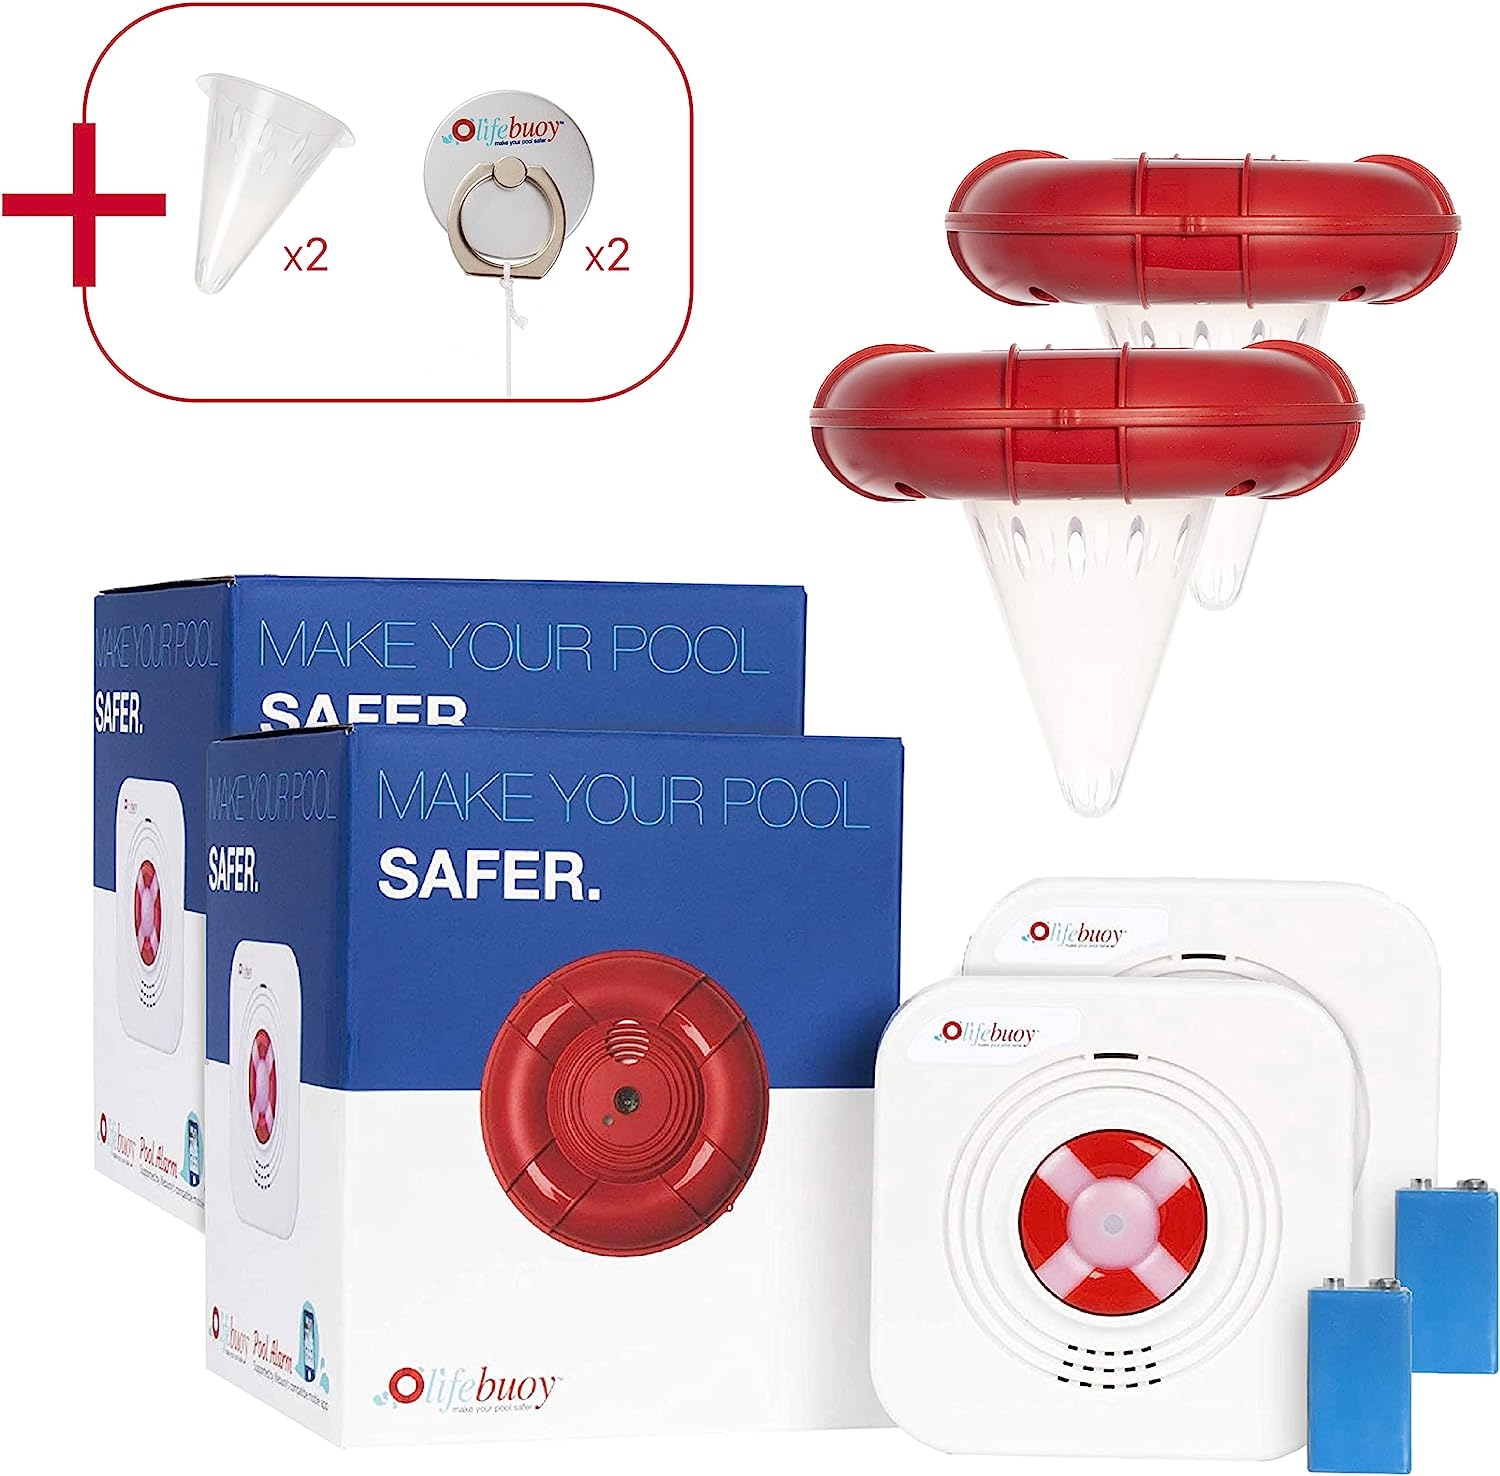 2 Full Lifebuoy Pool Alarm System Plus Additional 2 Cone and 2 Attachment kit. Pool Motion Sensor with Advanced Algorithm –